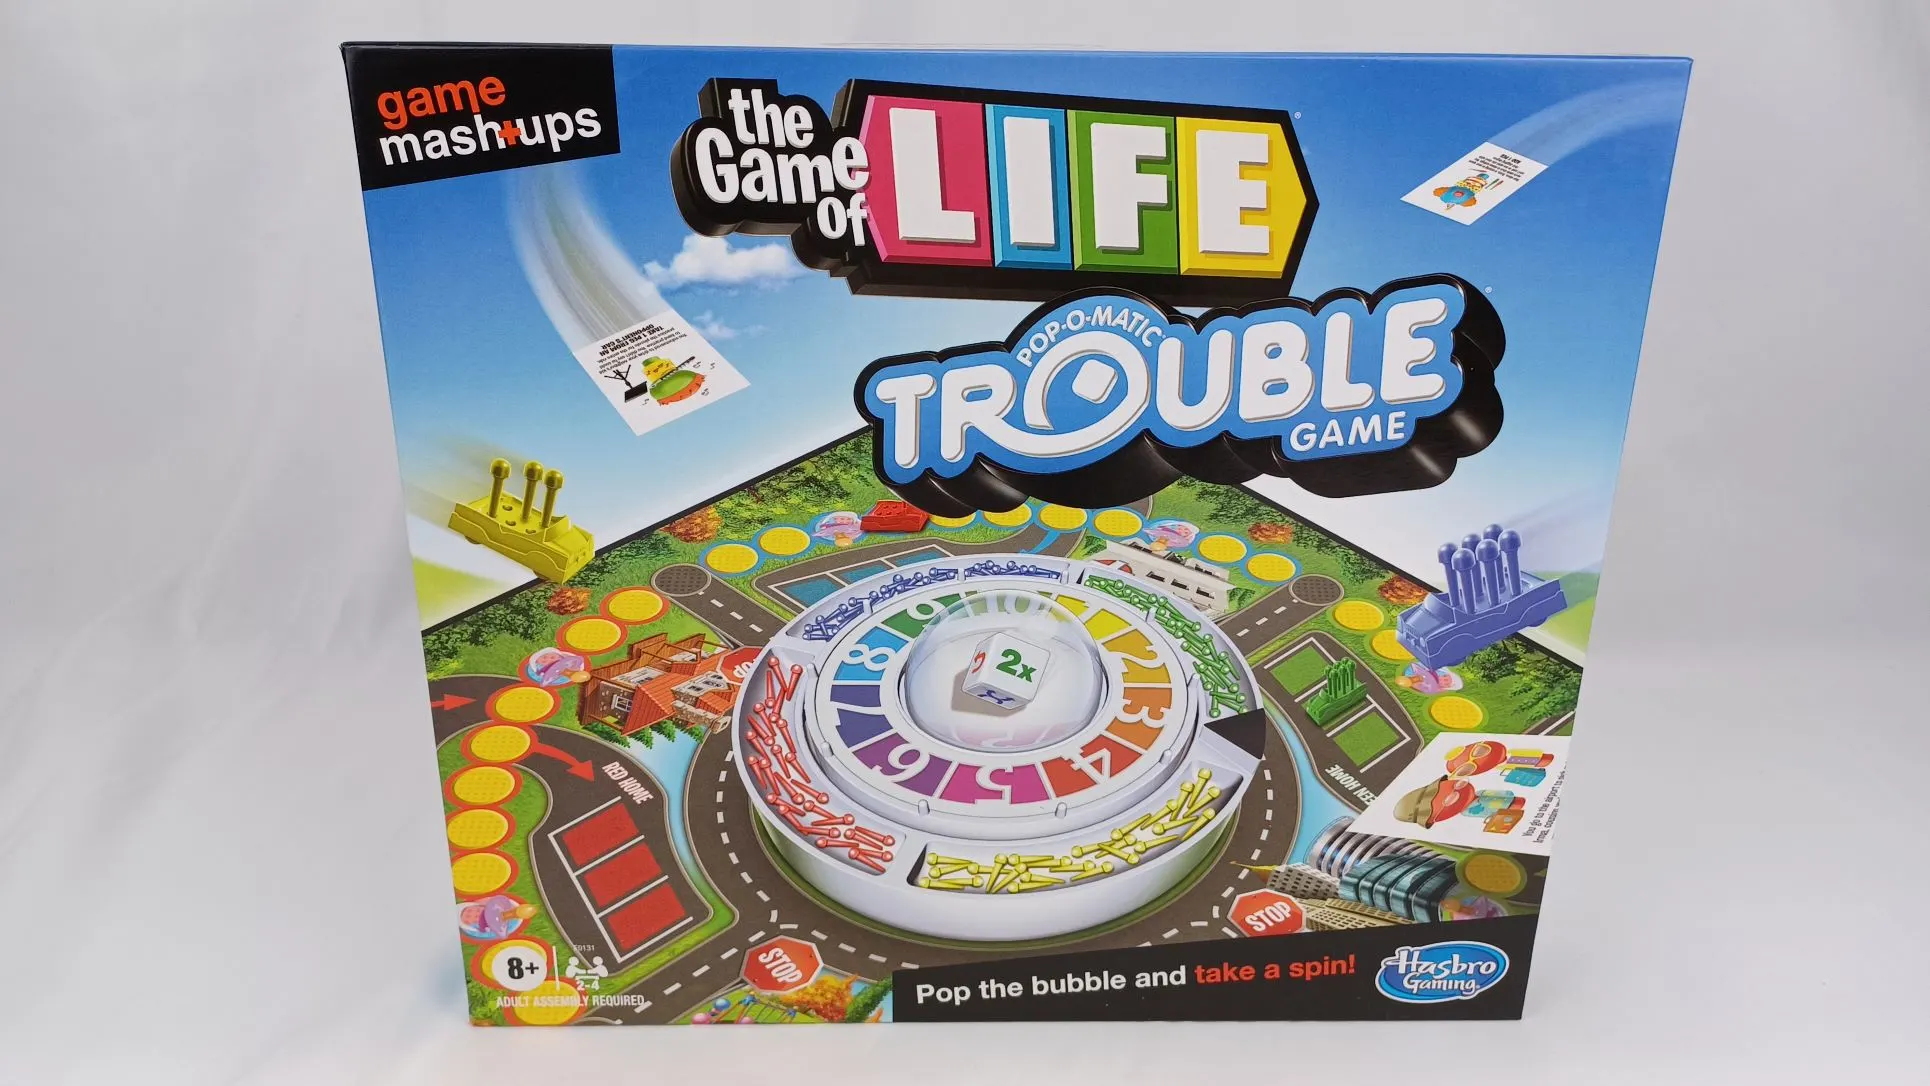 The Game of Life Trouble Board Game: Rules and Instructions for